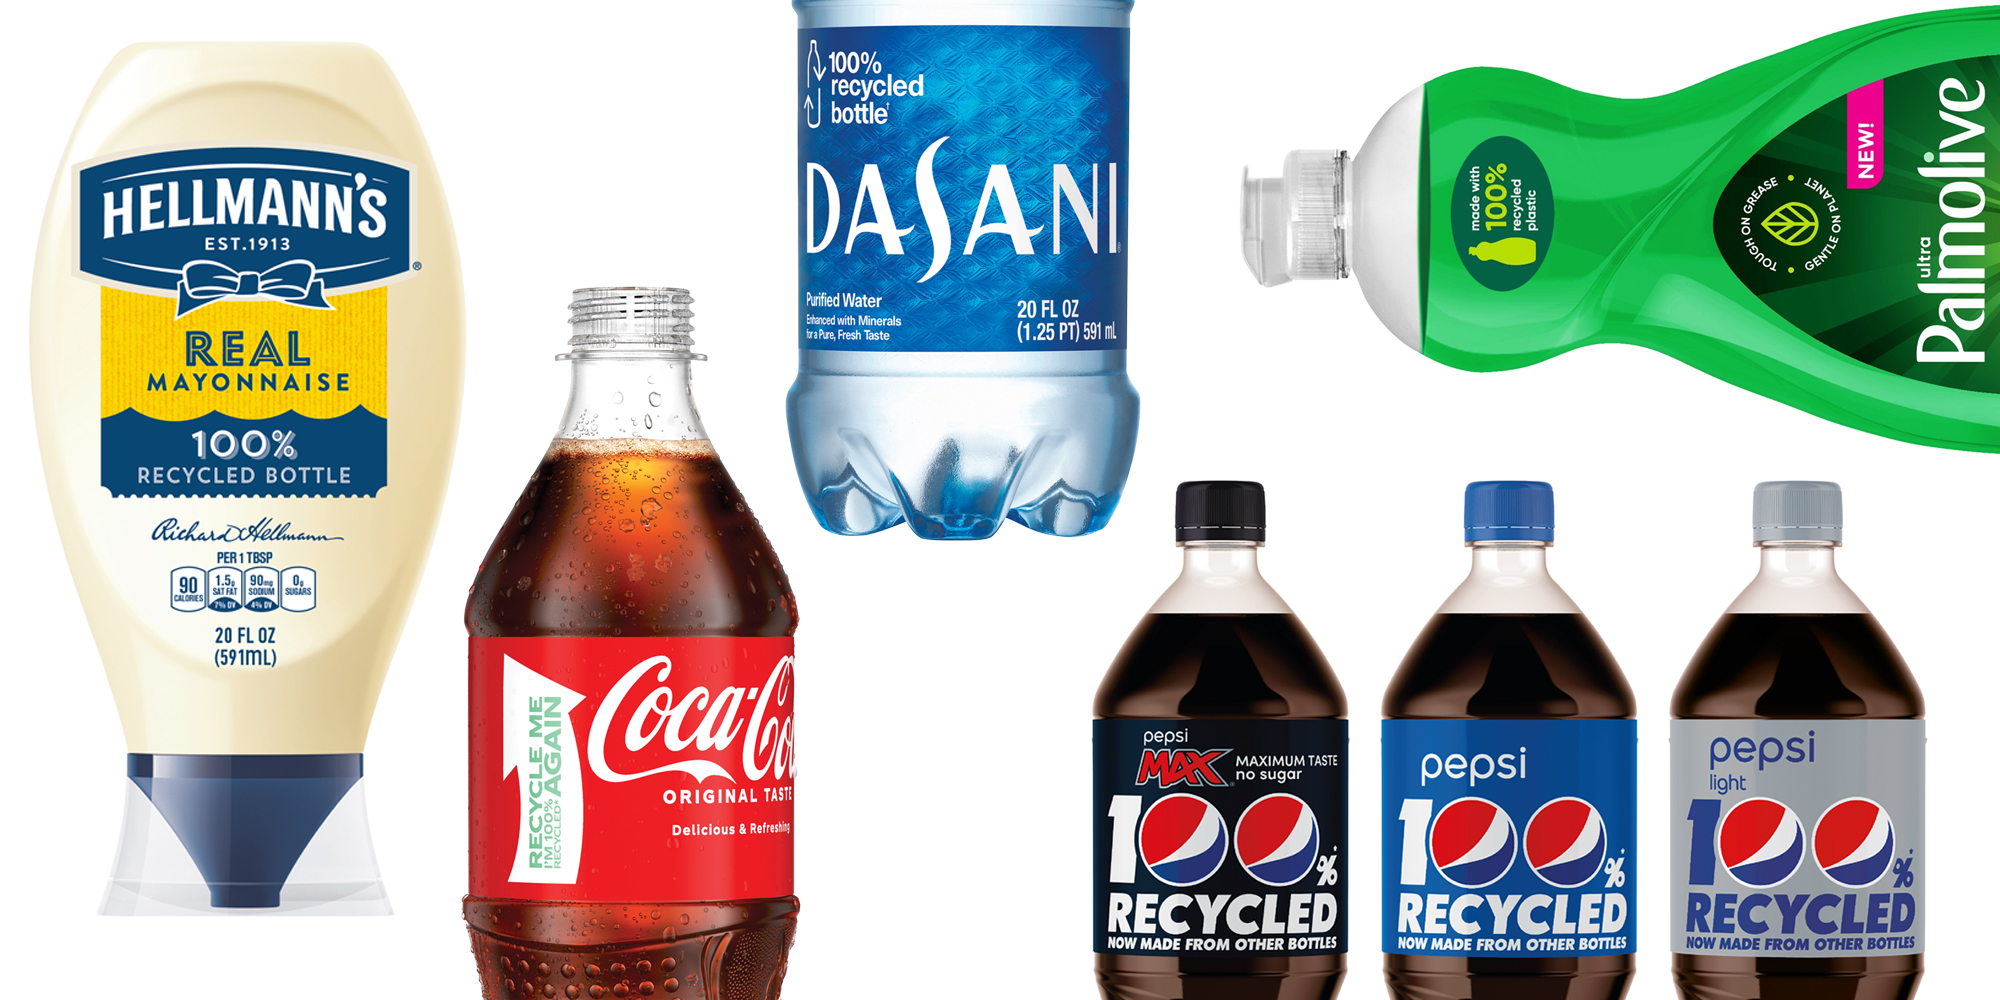 DASANI Launches Recycled Bottle Caps - News & Articles